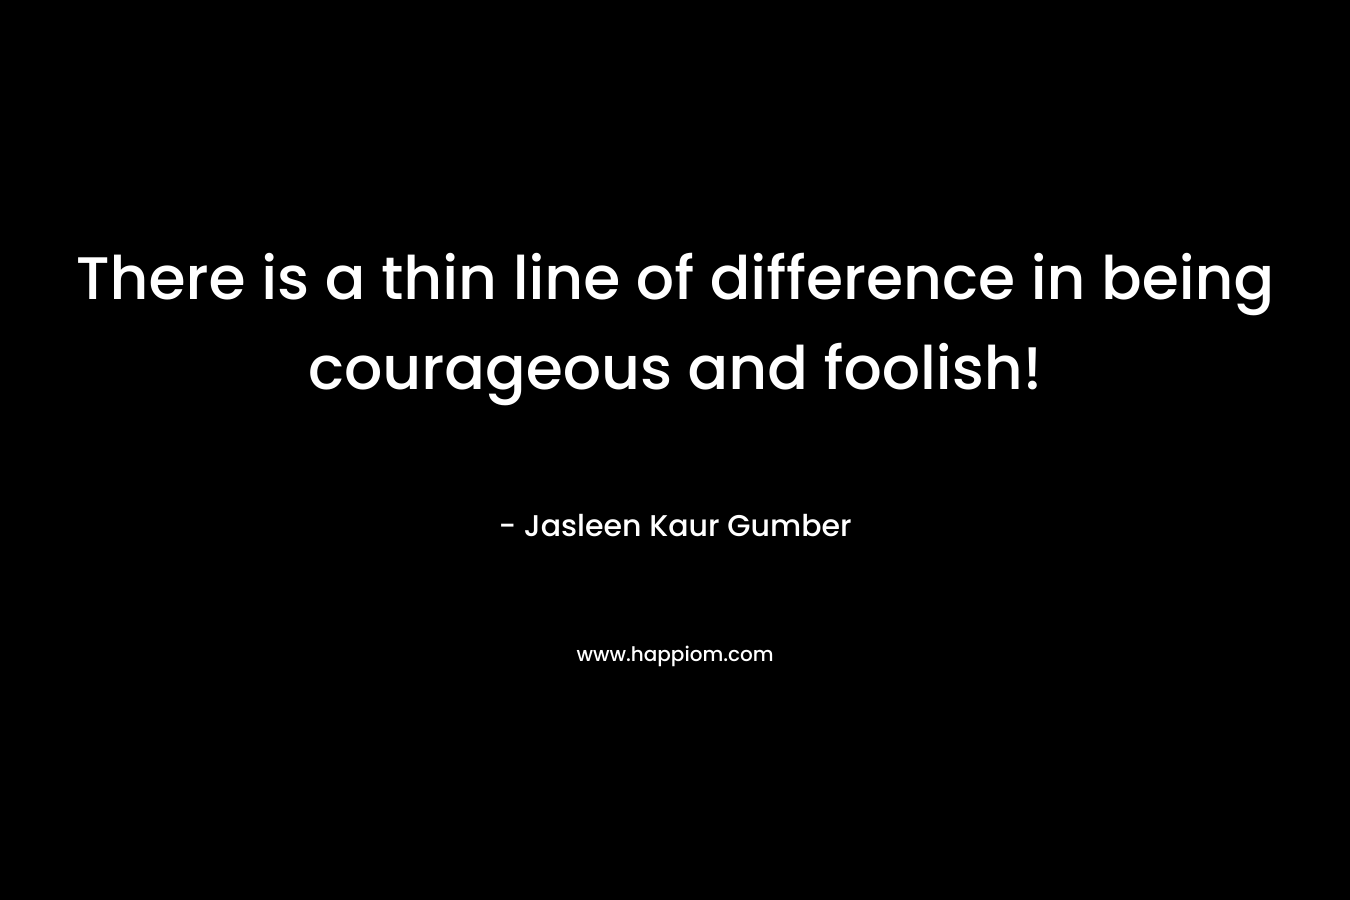 There is a thin line of difference in being courageous and foolish!